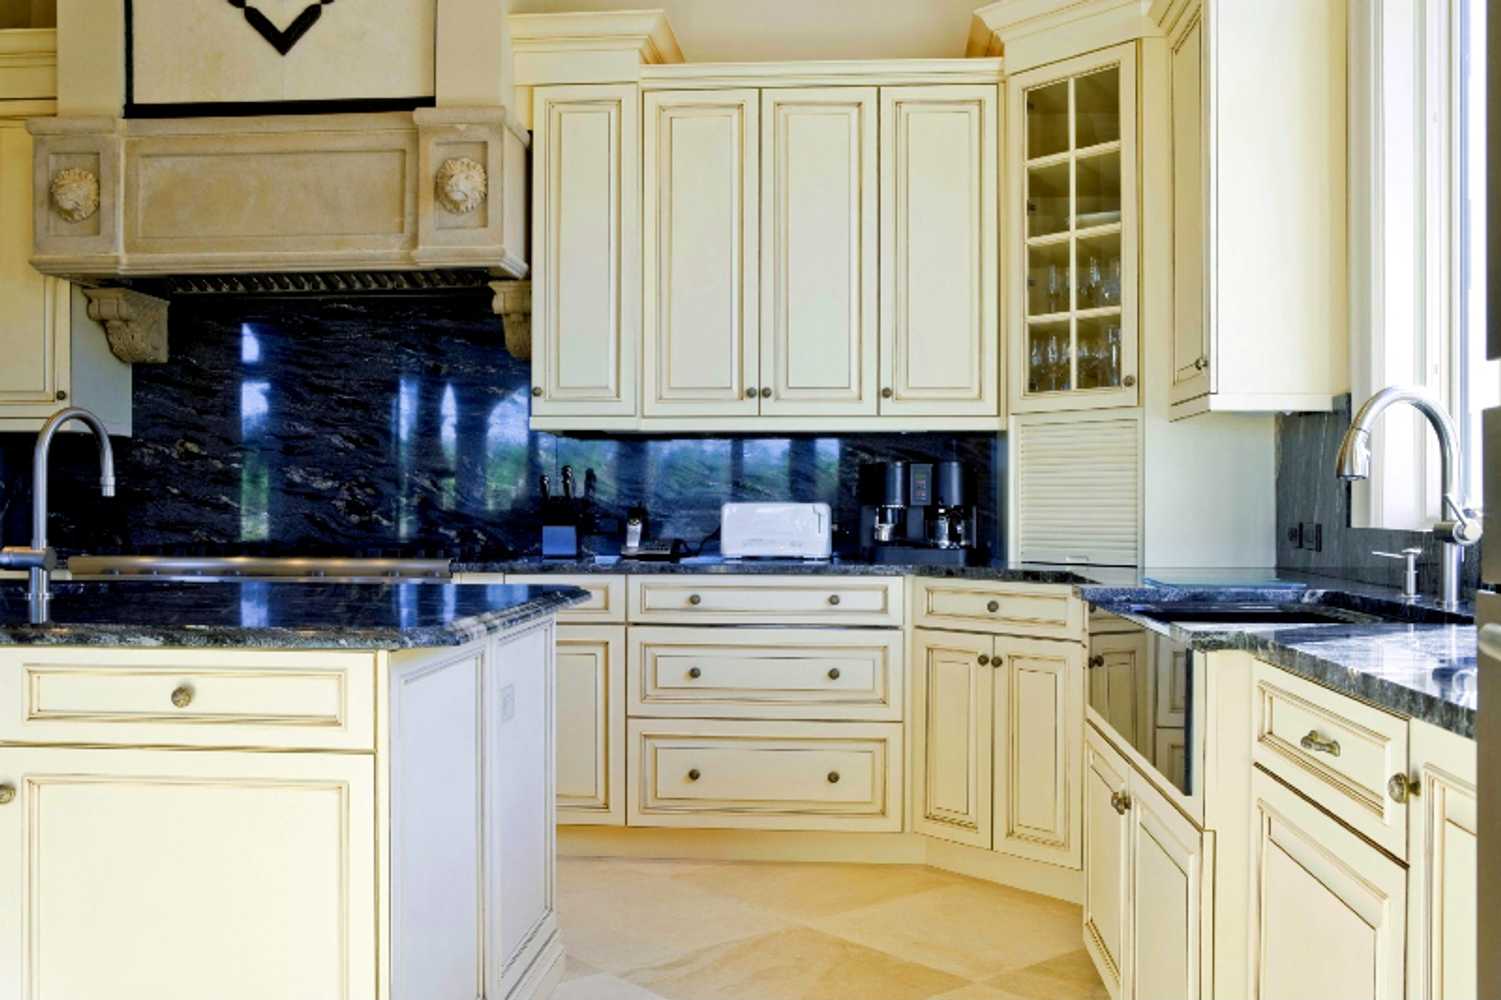 These kitchens look great after getting cabinet refacing by Cabinet Cures of Oklahoma!